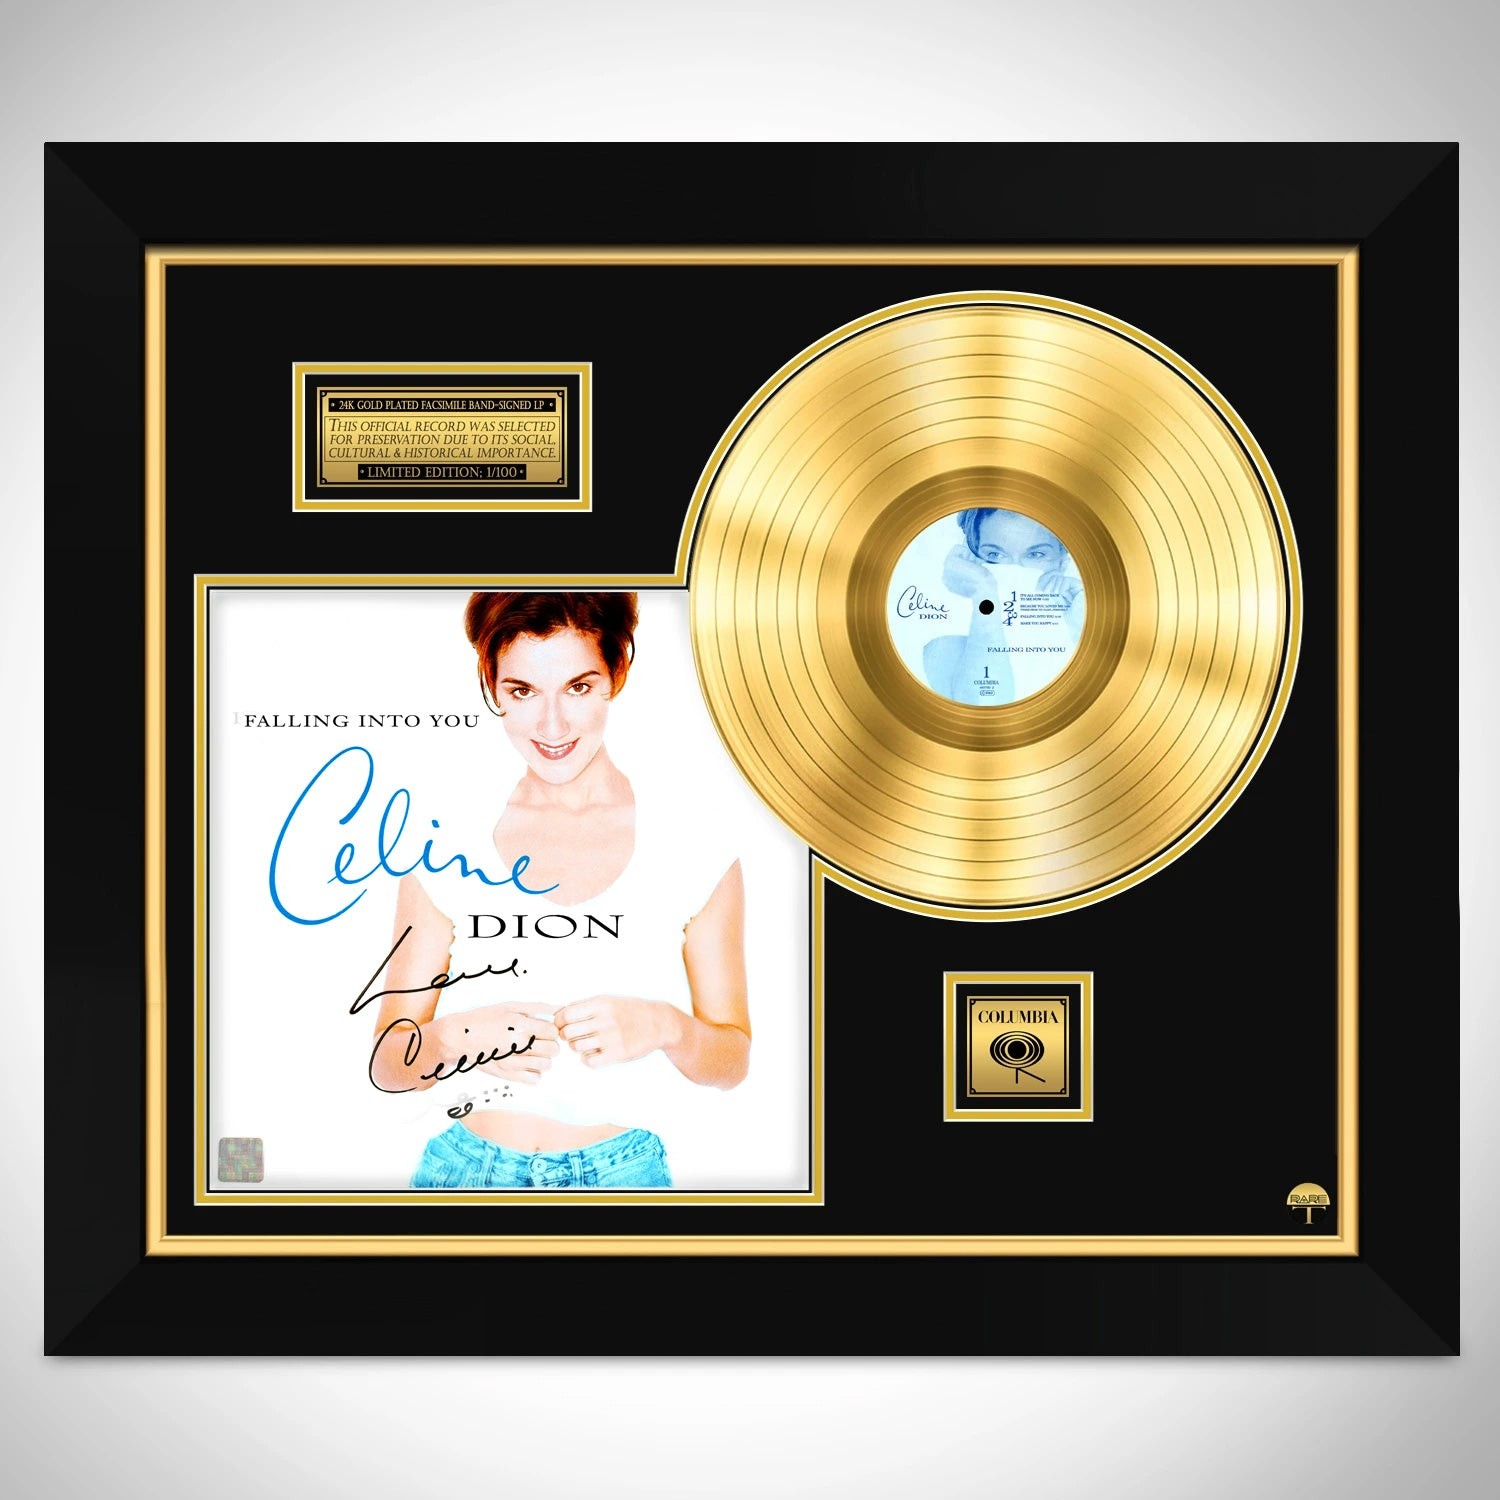 LP CELINE DION These Are Special Times (2LPs GOLD Vinyl, 2022) NEW MINT  SEALED